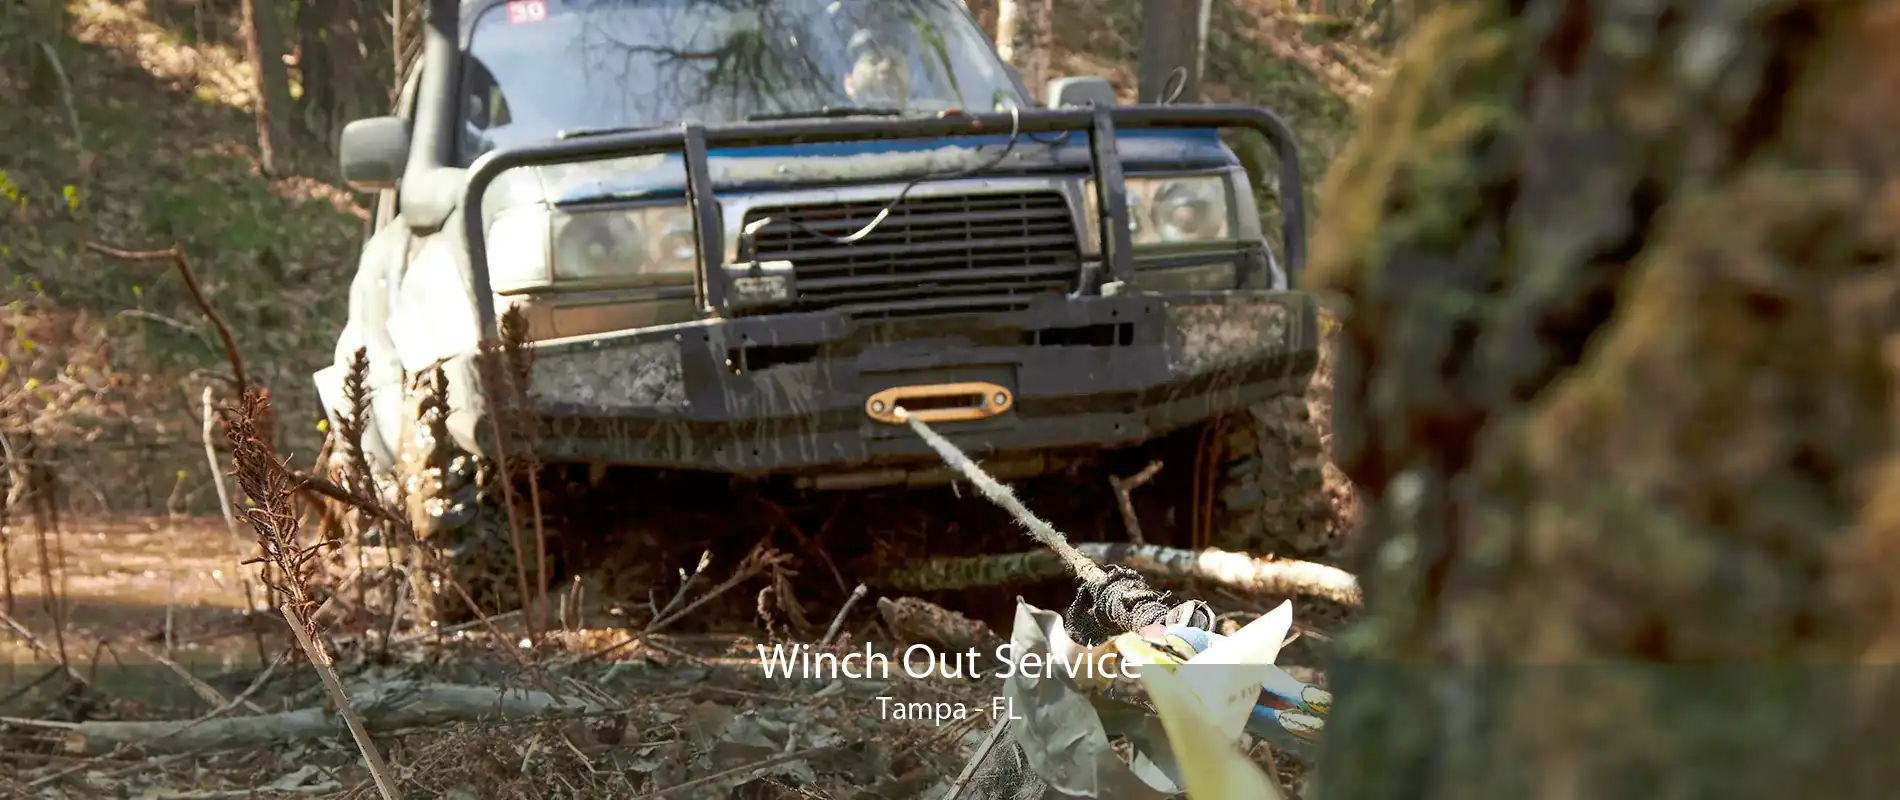 Winch Out Service Tampa - FL